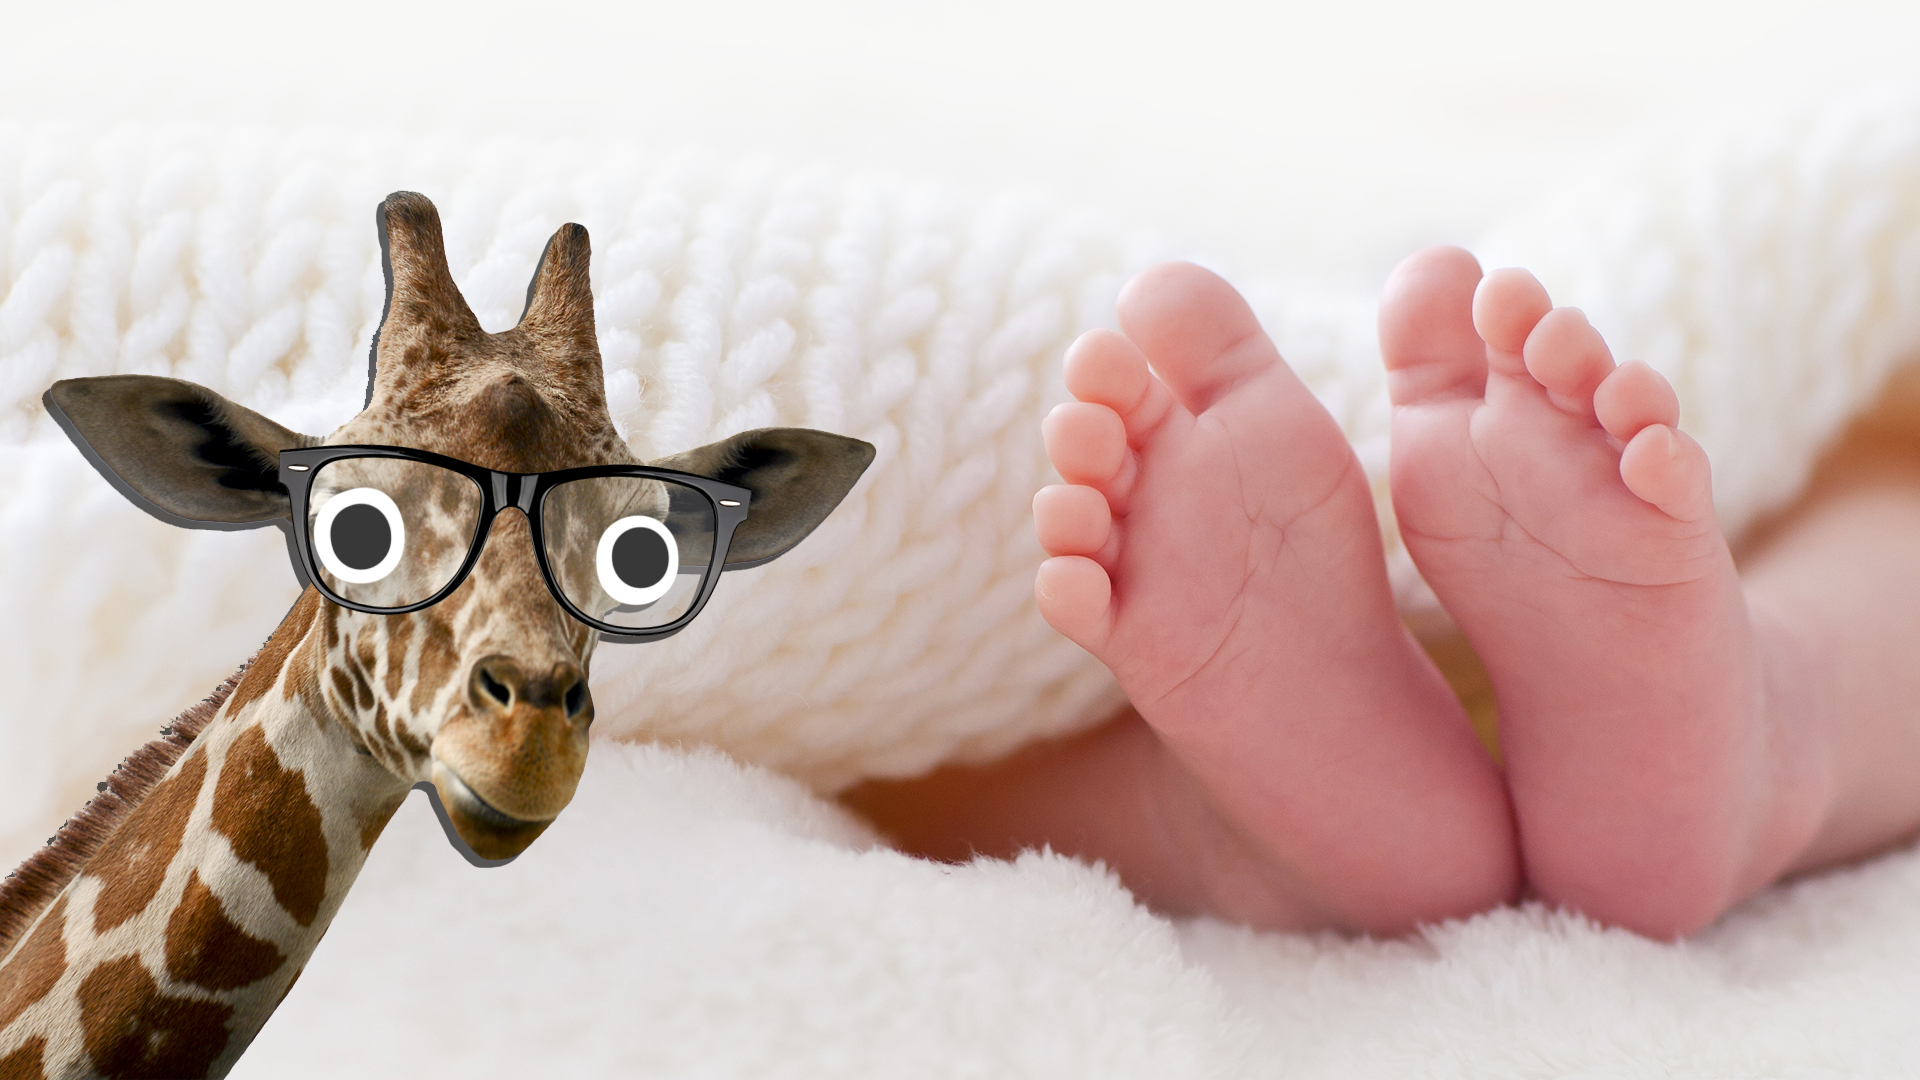 A giraffe looks at some very small feet